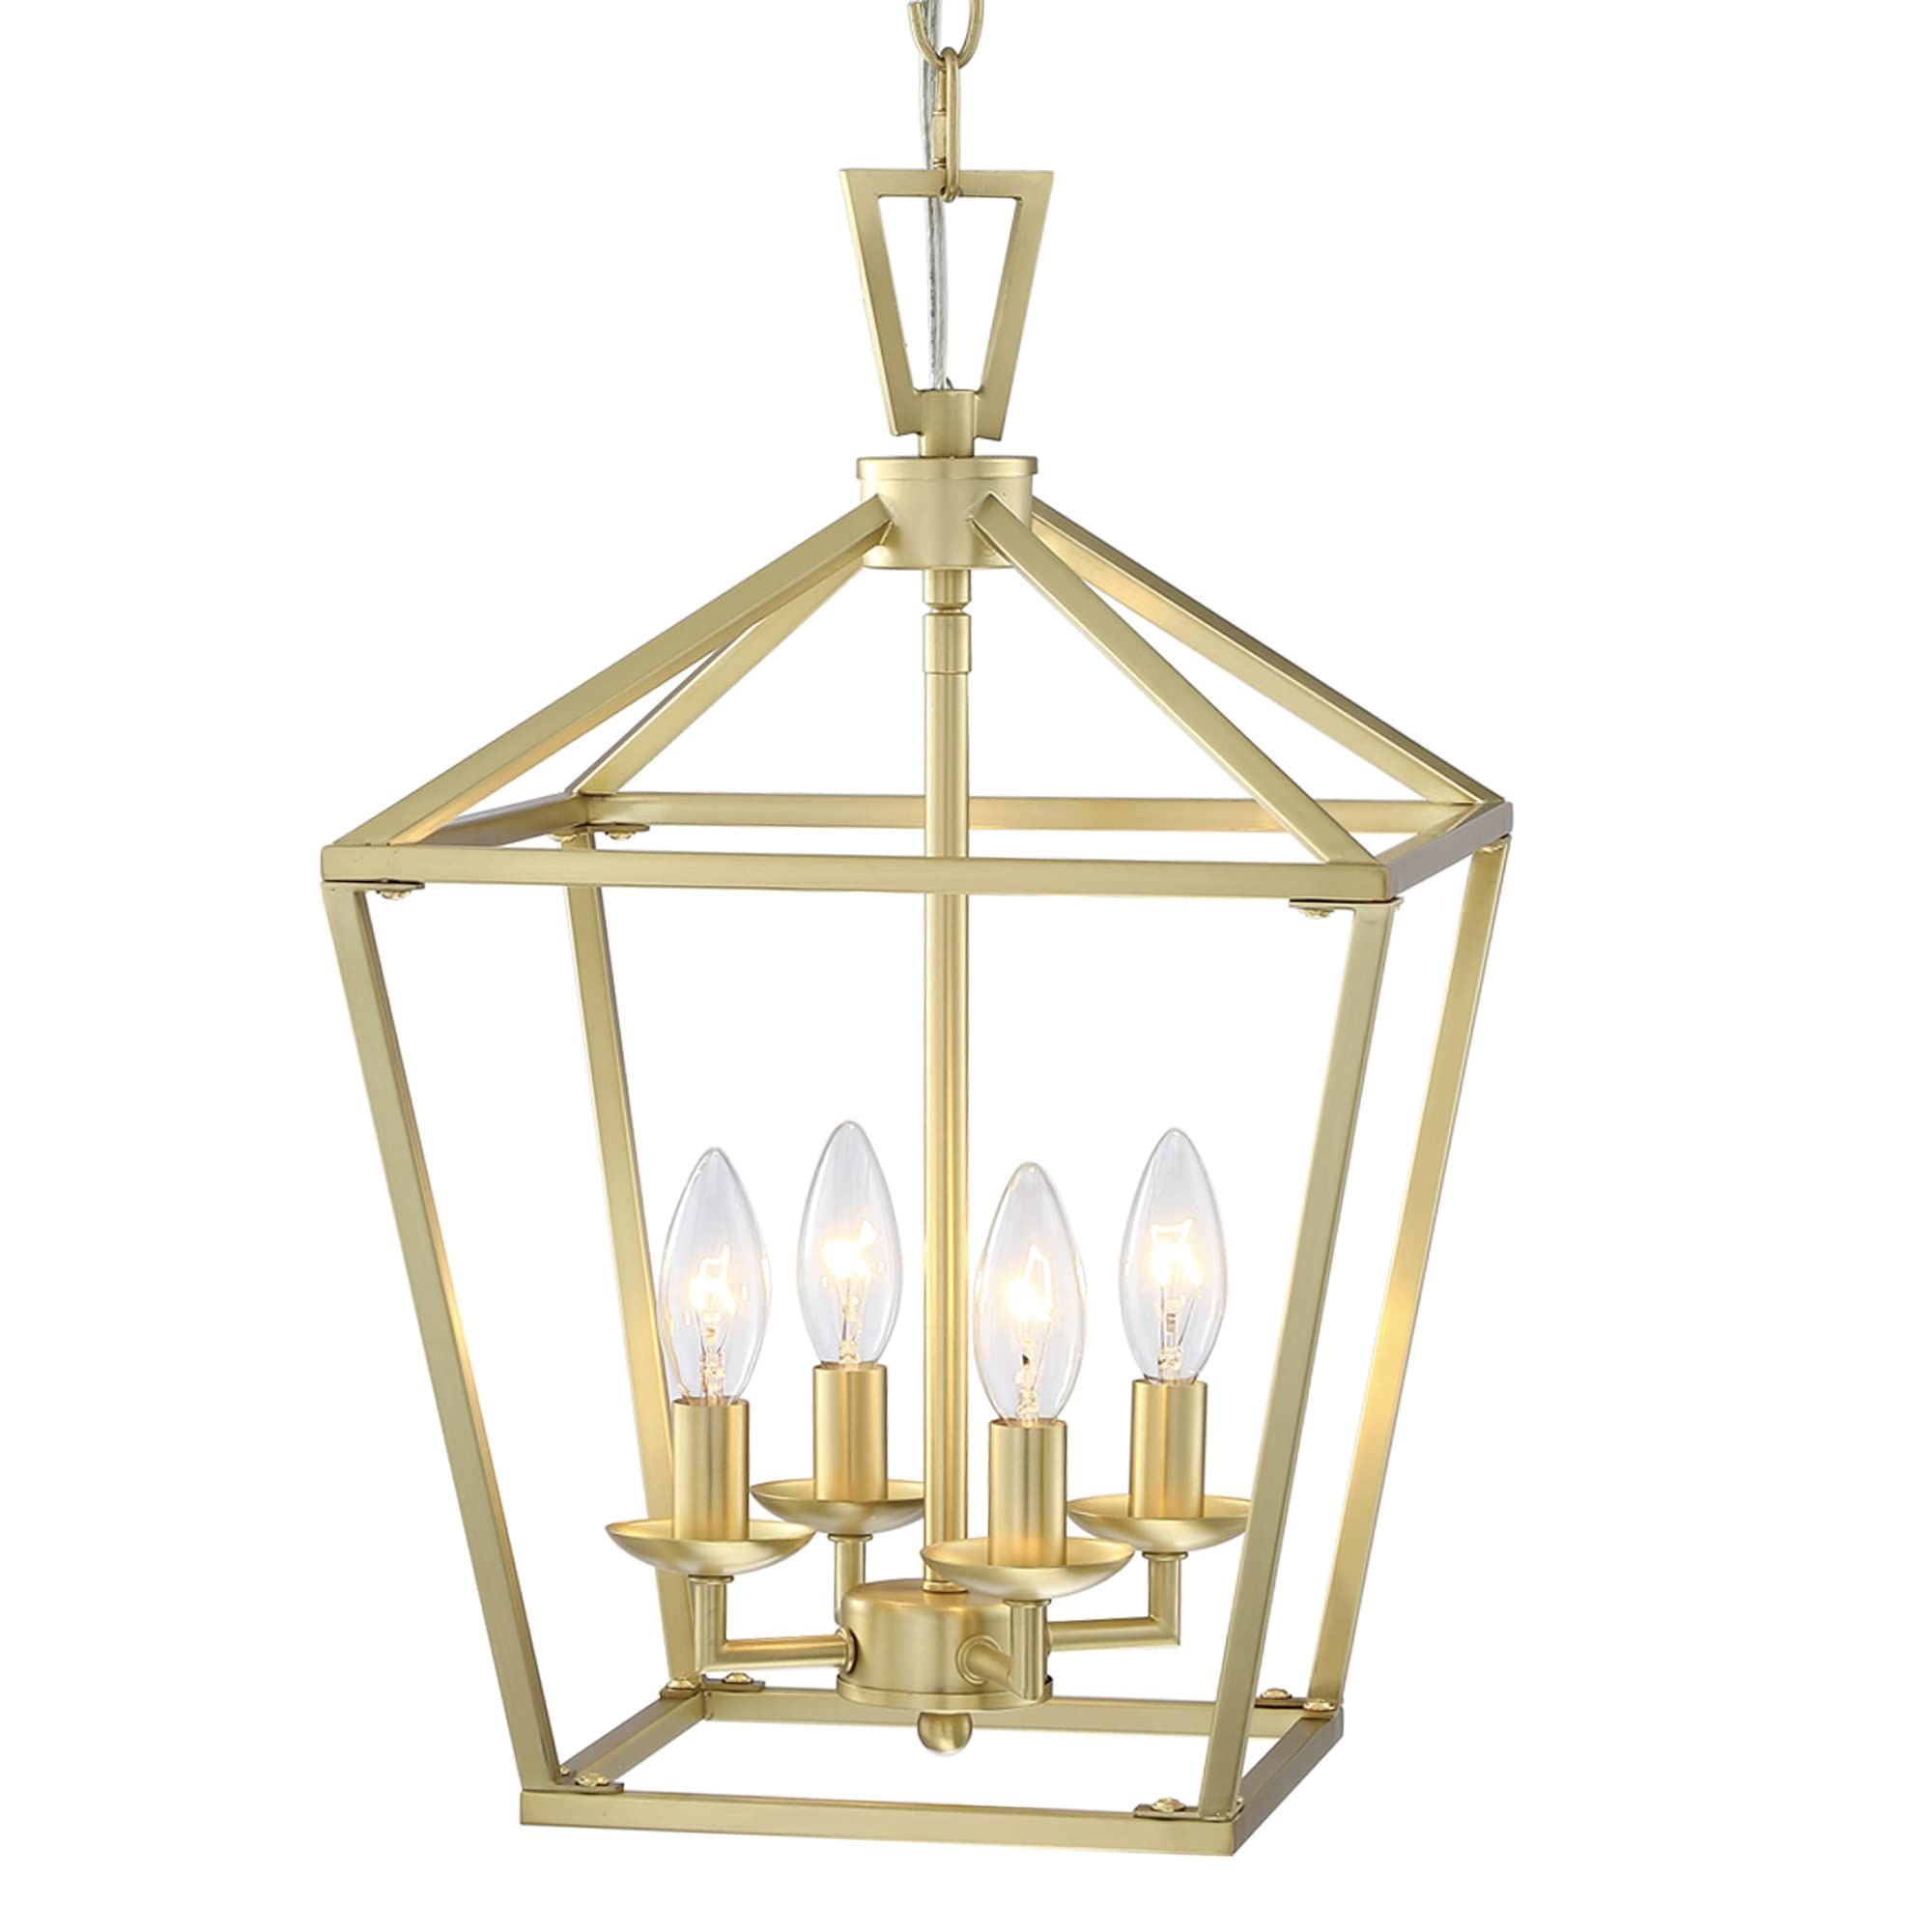 Fashionable Gild One Light Lantern Chandeliers Within Untrammelife Gold Lantern Chandelier 4 Light Pendant Light Modern Hanging Pendant  Light Fixtures In Brushed Brass Finish, Adjustable Metal Chain Geometric  Chandelier For Kitchen Island Stair Foyer – – Amazon (View 4 of 10)